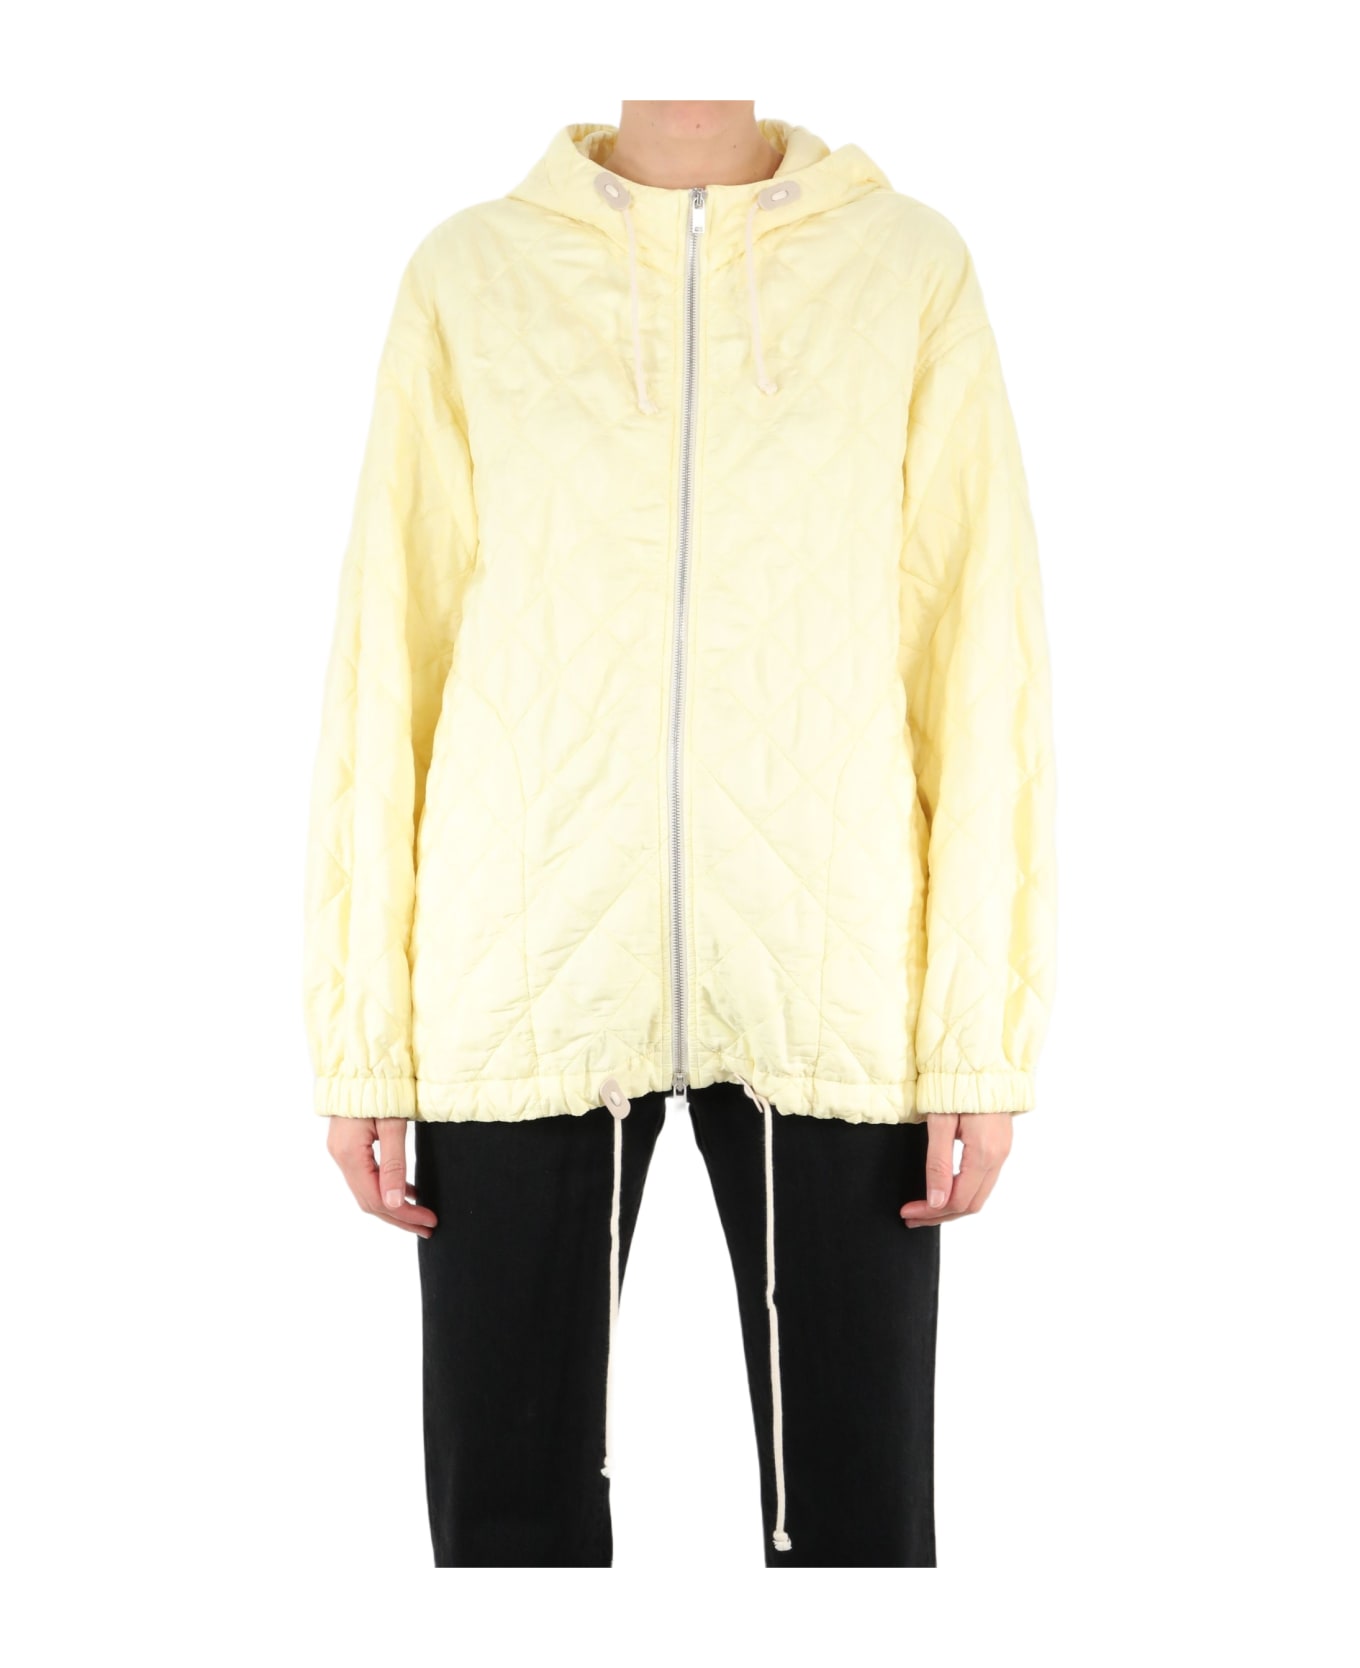 Jil Sander Yellow Quilted Jacket - YELLOW